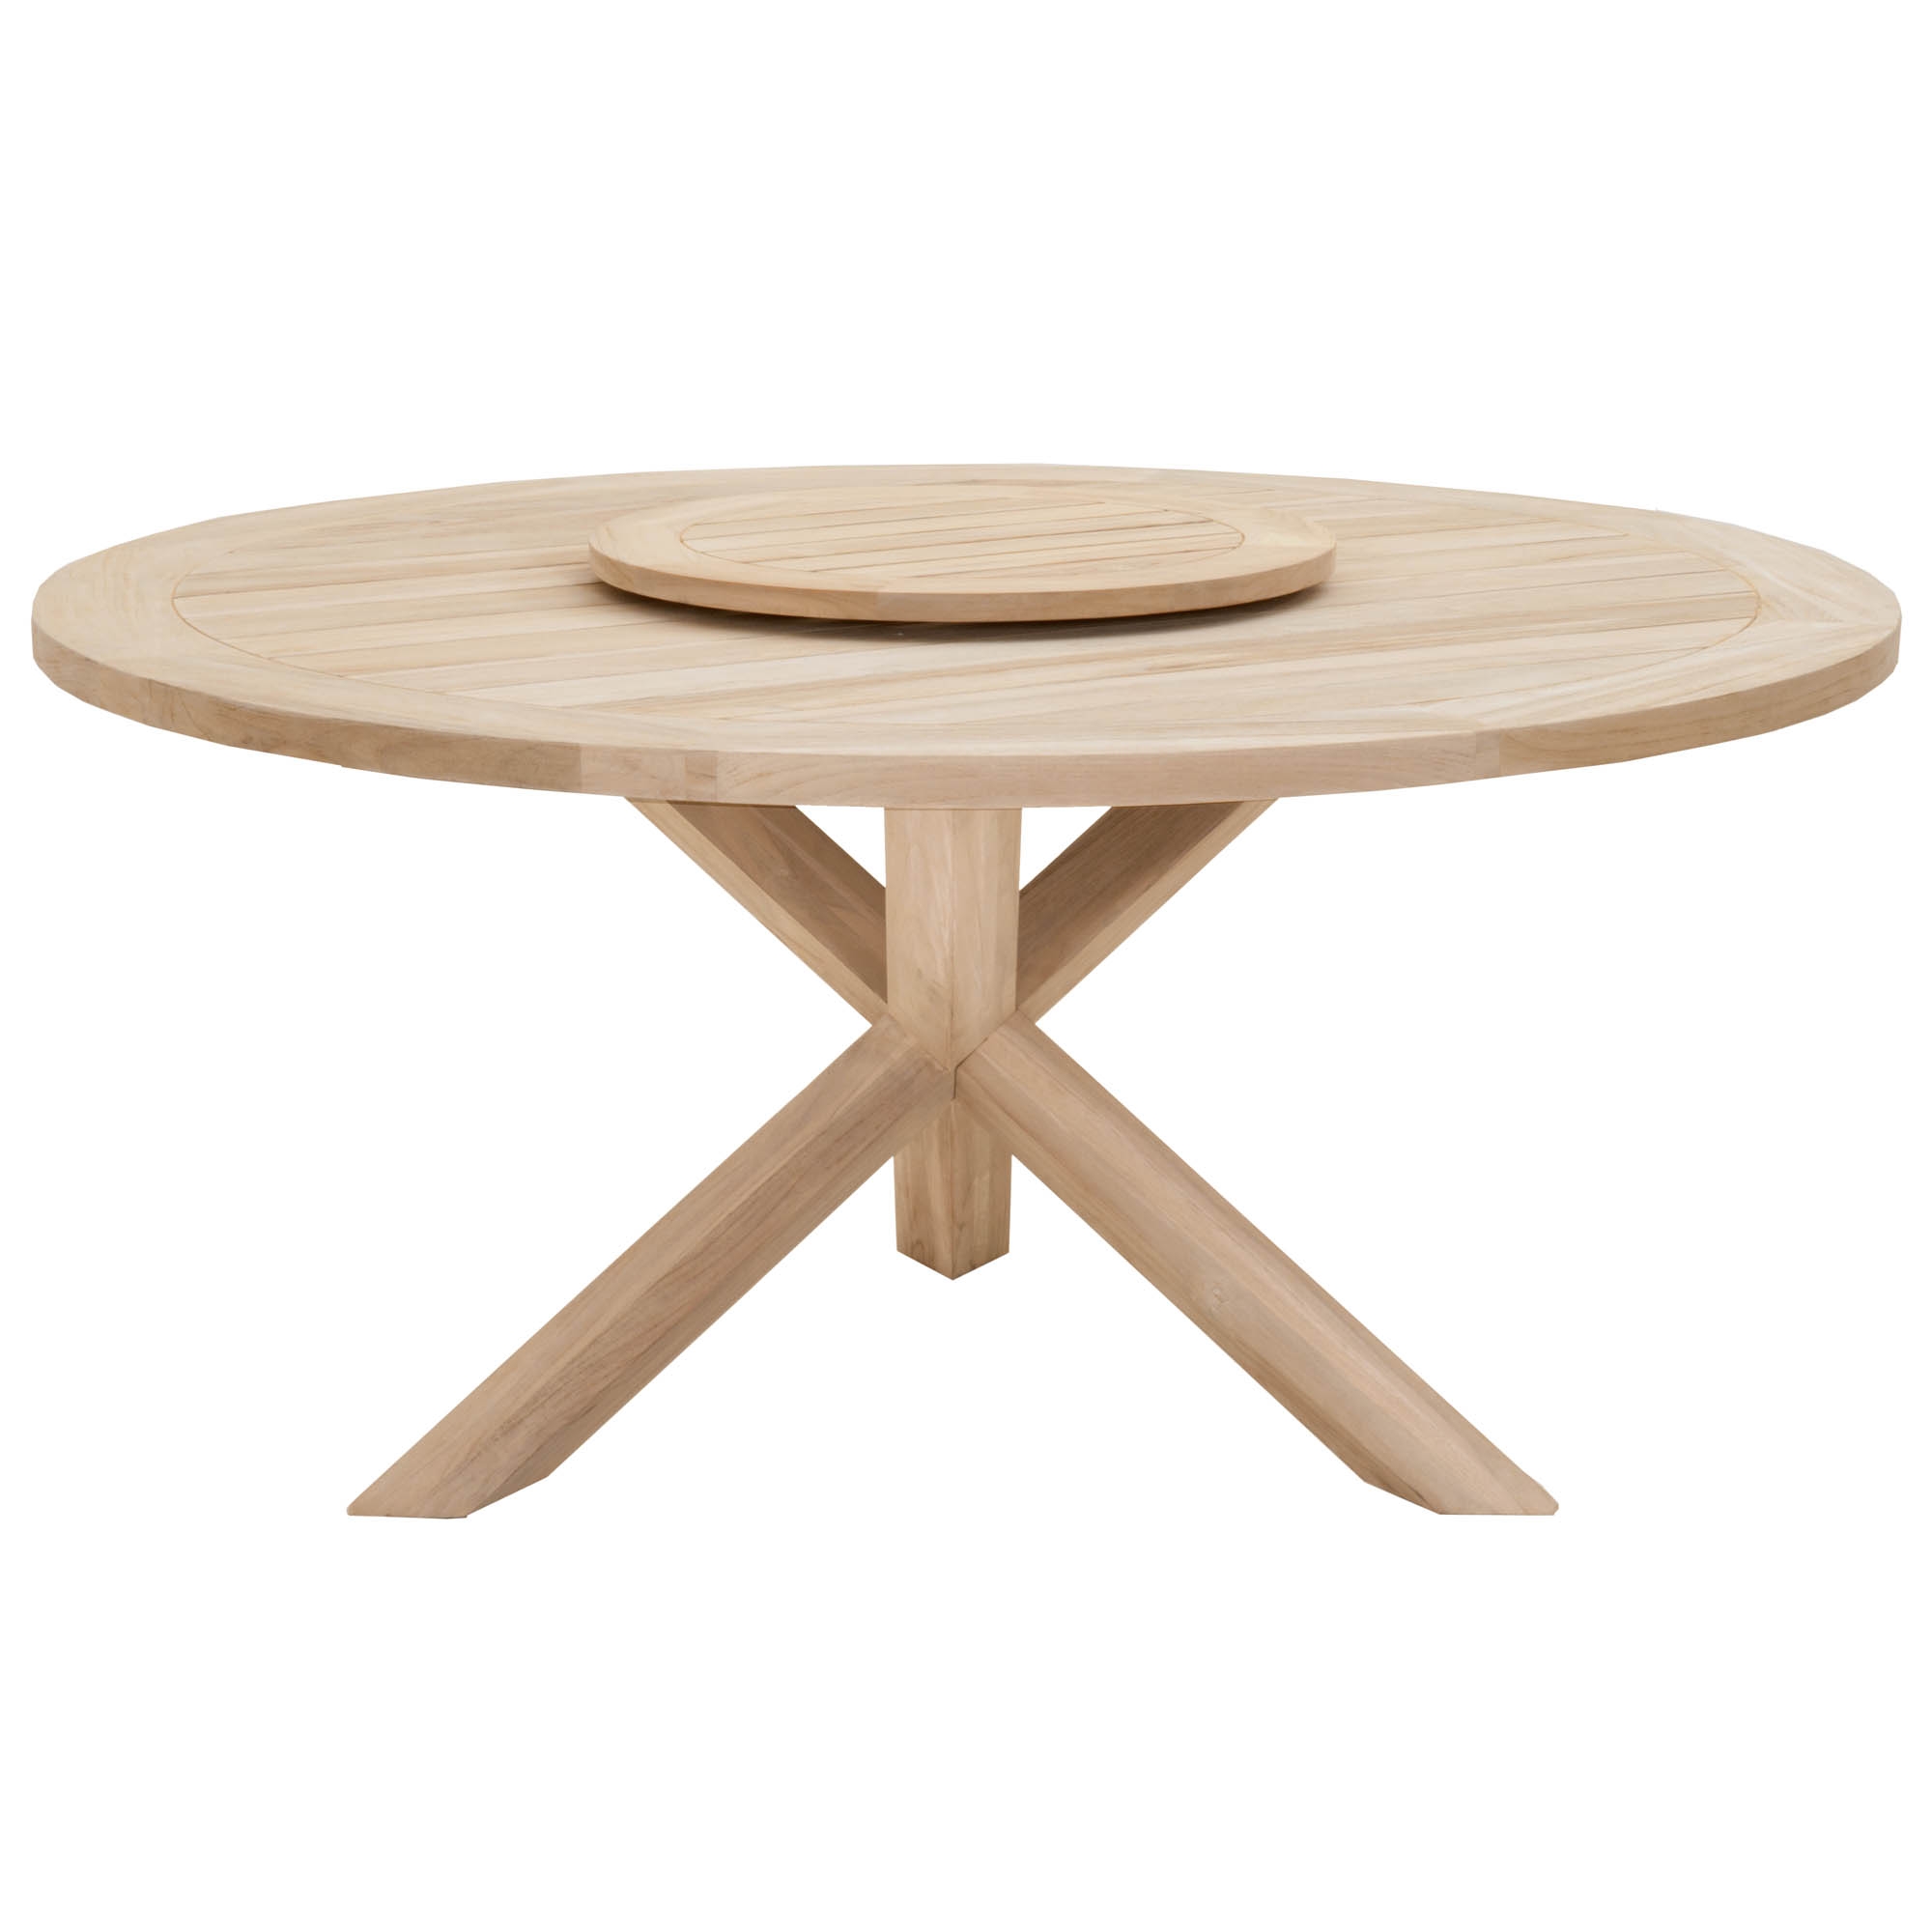 Adelaide Indoor / Outdoor Round Dining Table - Image 2